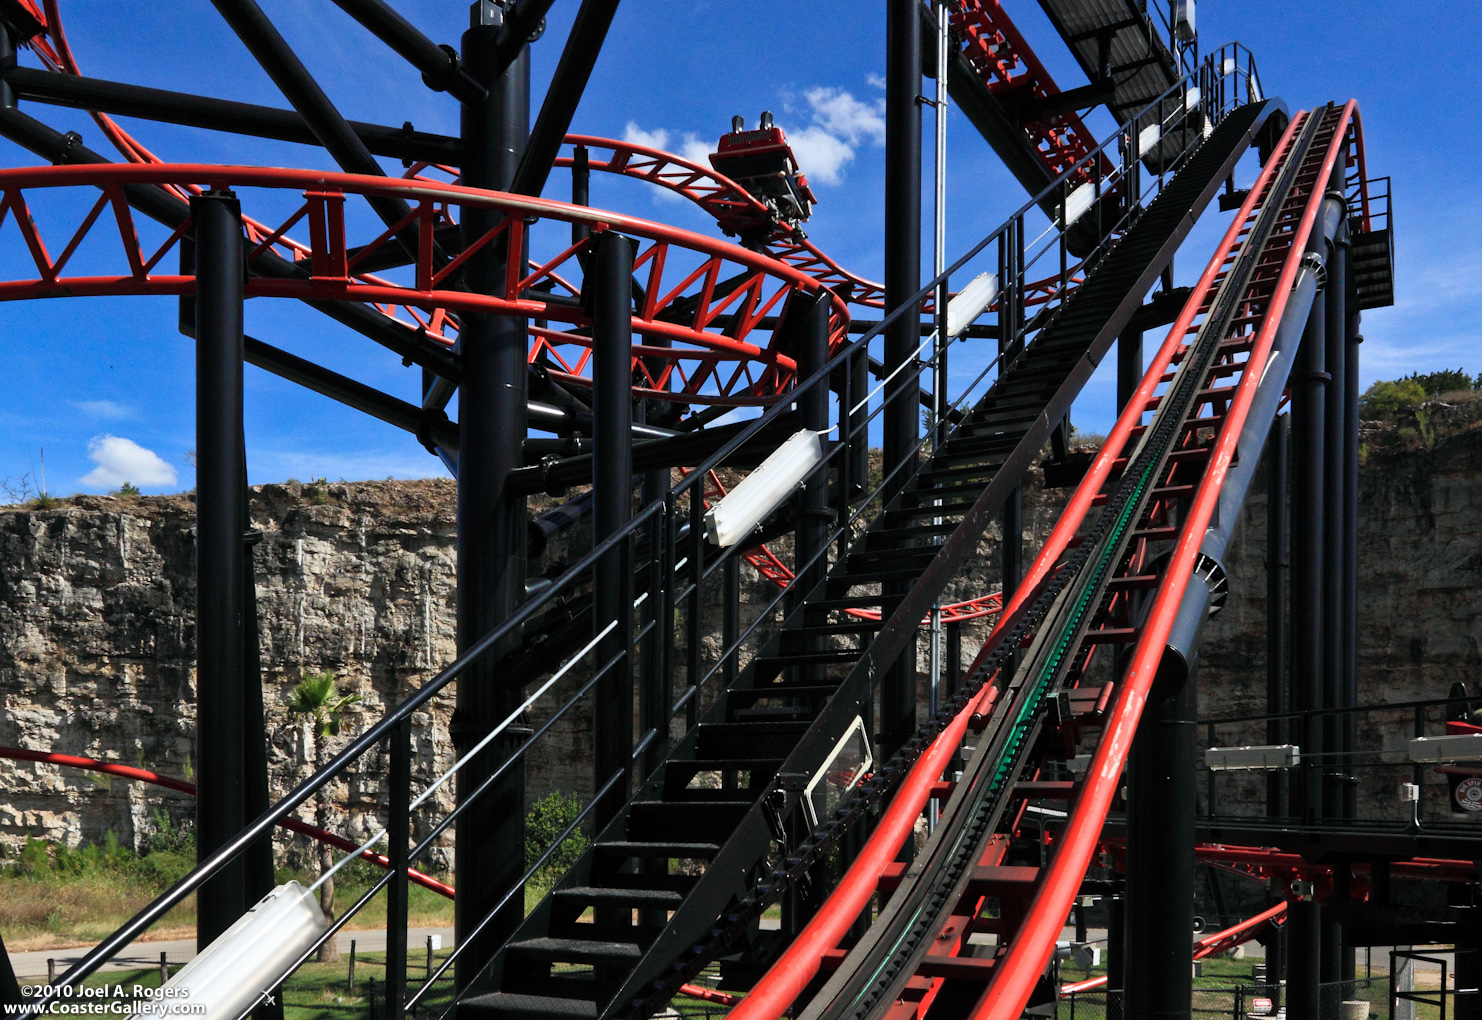 A chain coming out of a roller coaster lift hill. The Pandemonium spinning roller coaster in San Antonio, Texas.